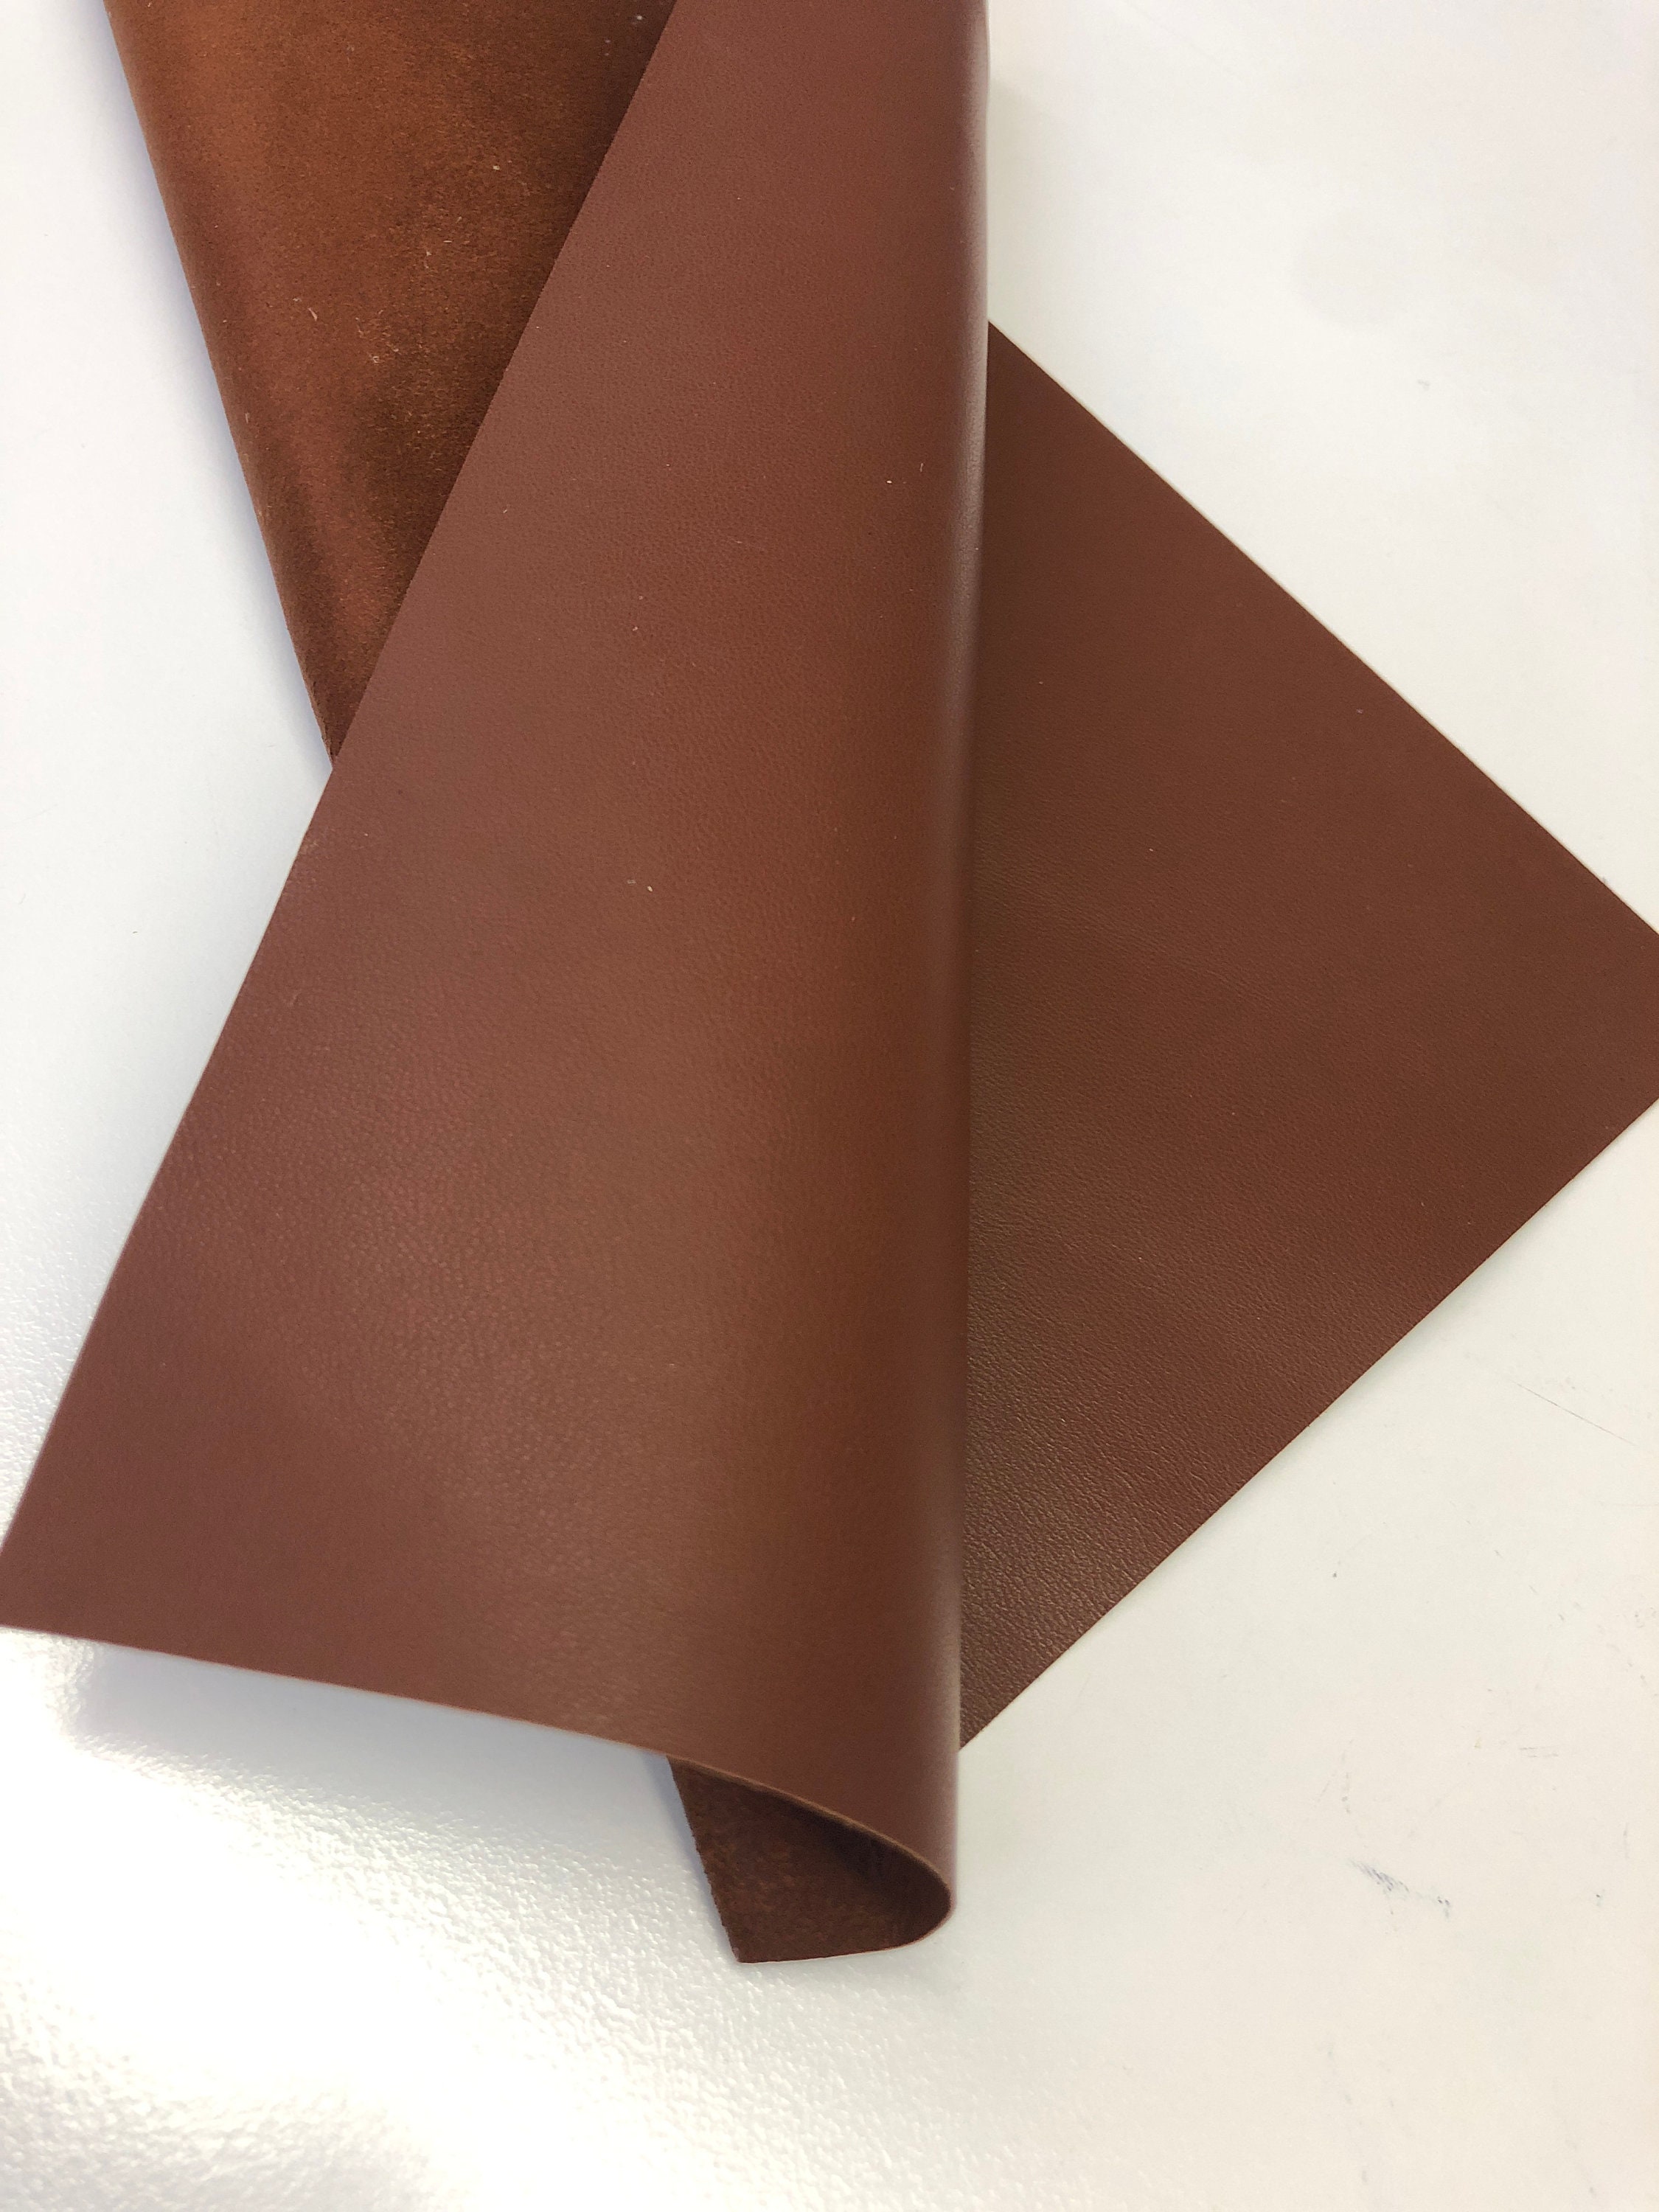 KEHLDMENG 12 x 24 Genuine Leather Pieces / 10 SF Leather Sheets for  Leather Working/Random Colours (5 pc)